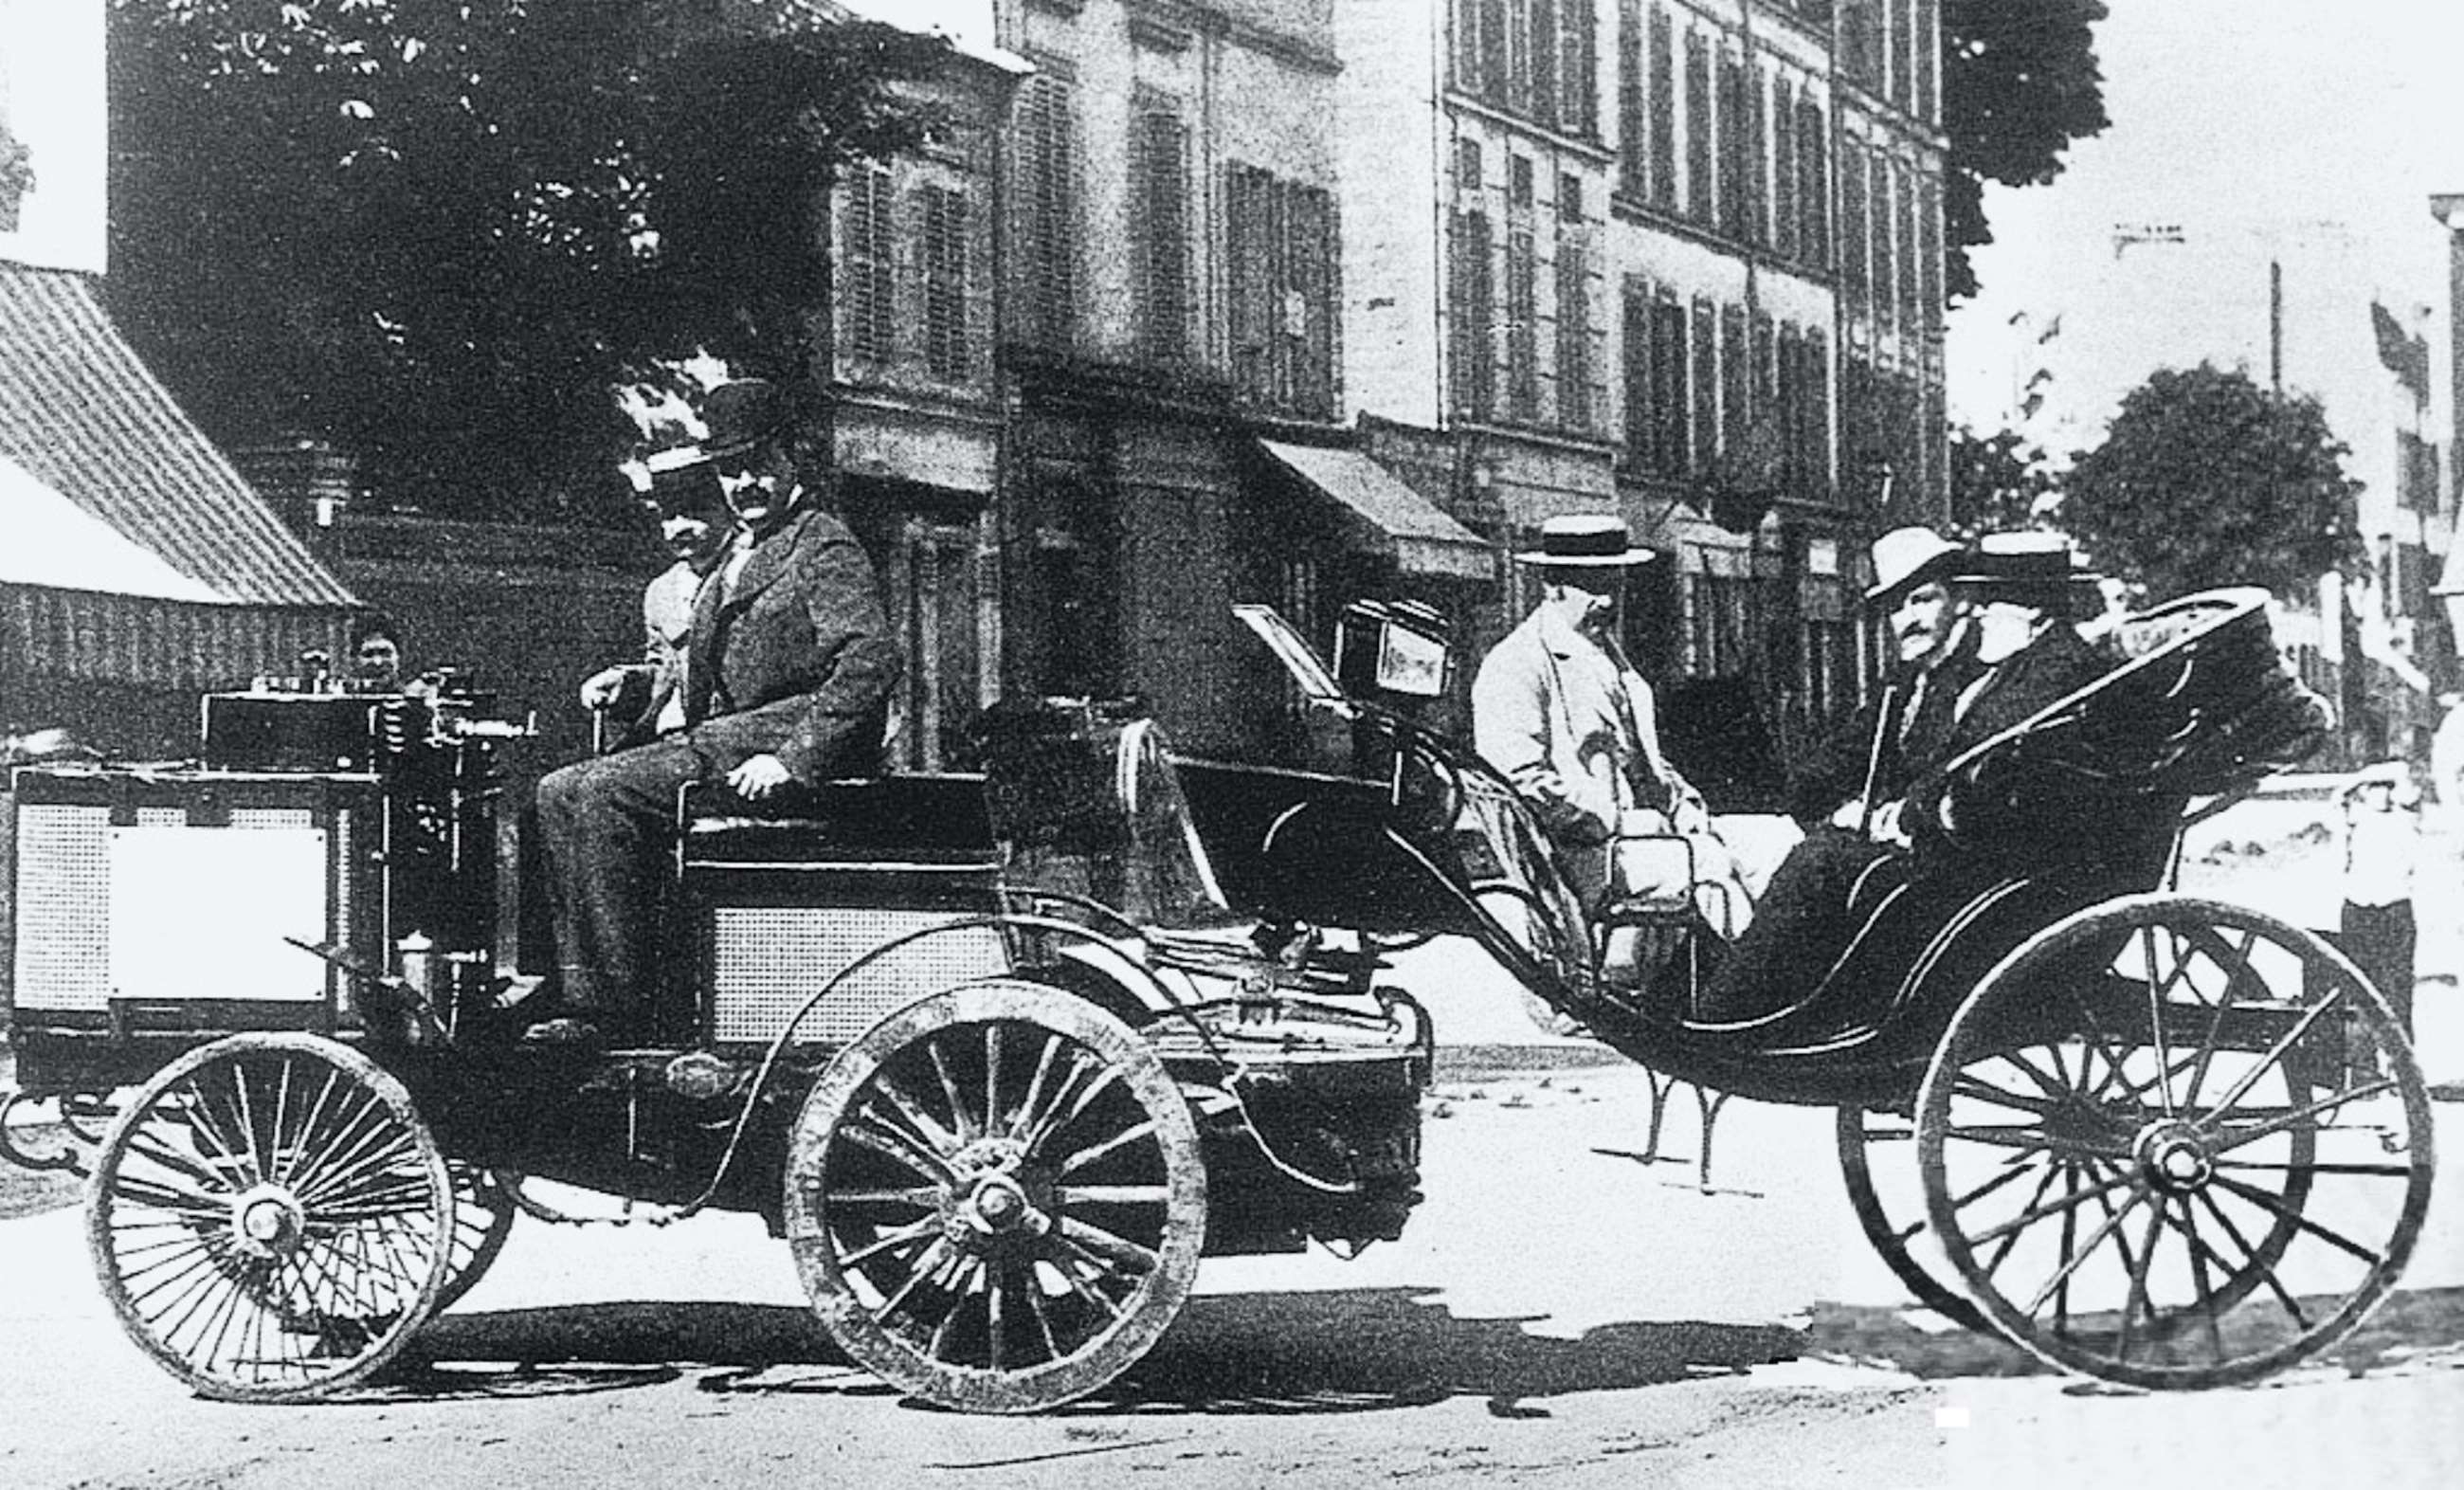 Count Albert de Dion’s steam tractor, built by his De Dion, Bouton & Trépardoux company, reached the finish first in the 1894 Paris-Rouen Trial but shared the £25,000 first prize with Peugeot. The Count’s elderly father - the Marquis Louis Albert Guillaume de Dion de Wandonne – is seated in the towed carriage body (far right). Beside the Count up front is his engineer/mechanic.